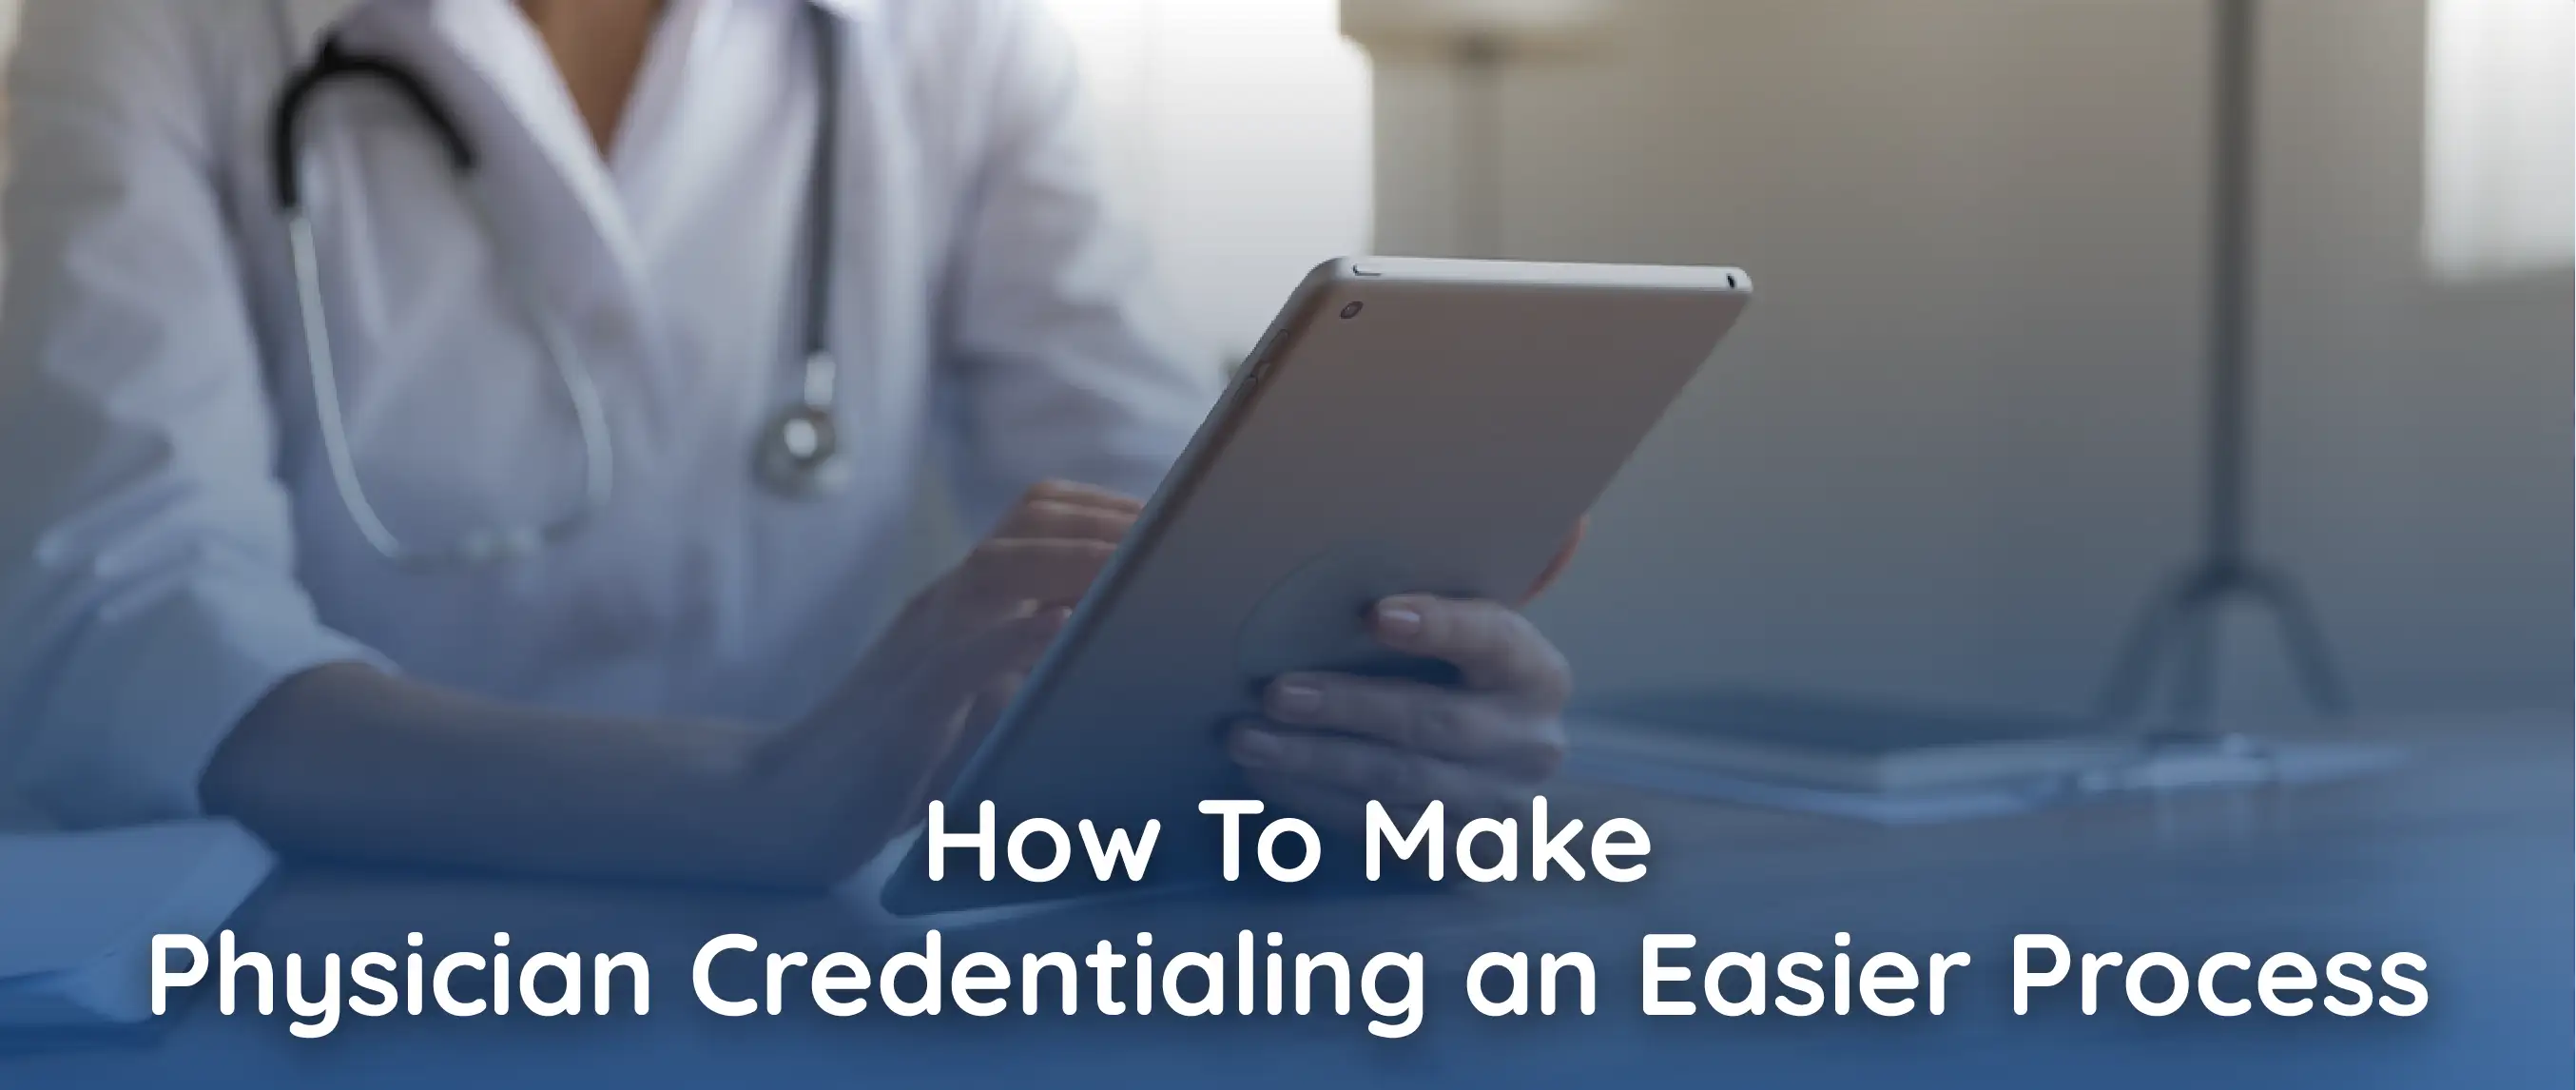 How To Make Physician Credentialing an Easier Process   